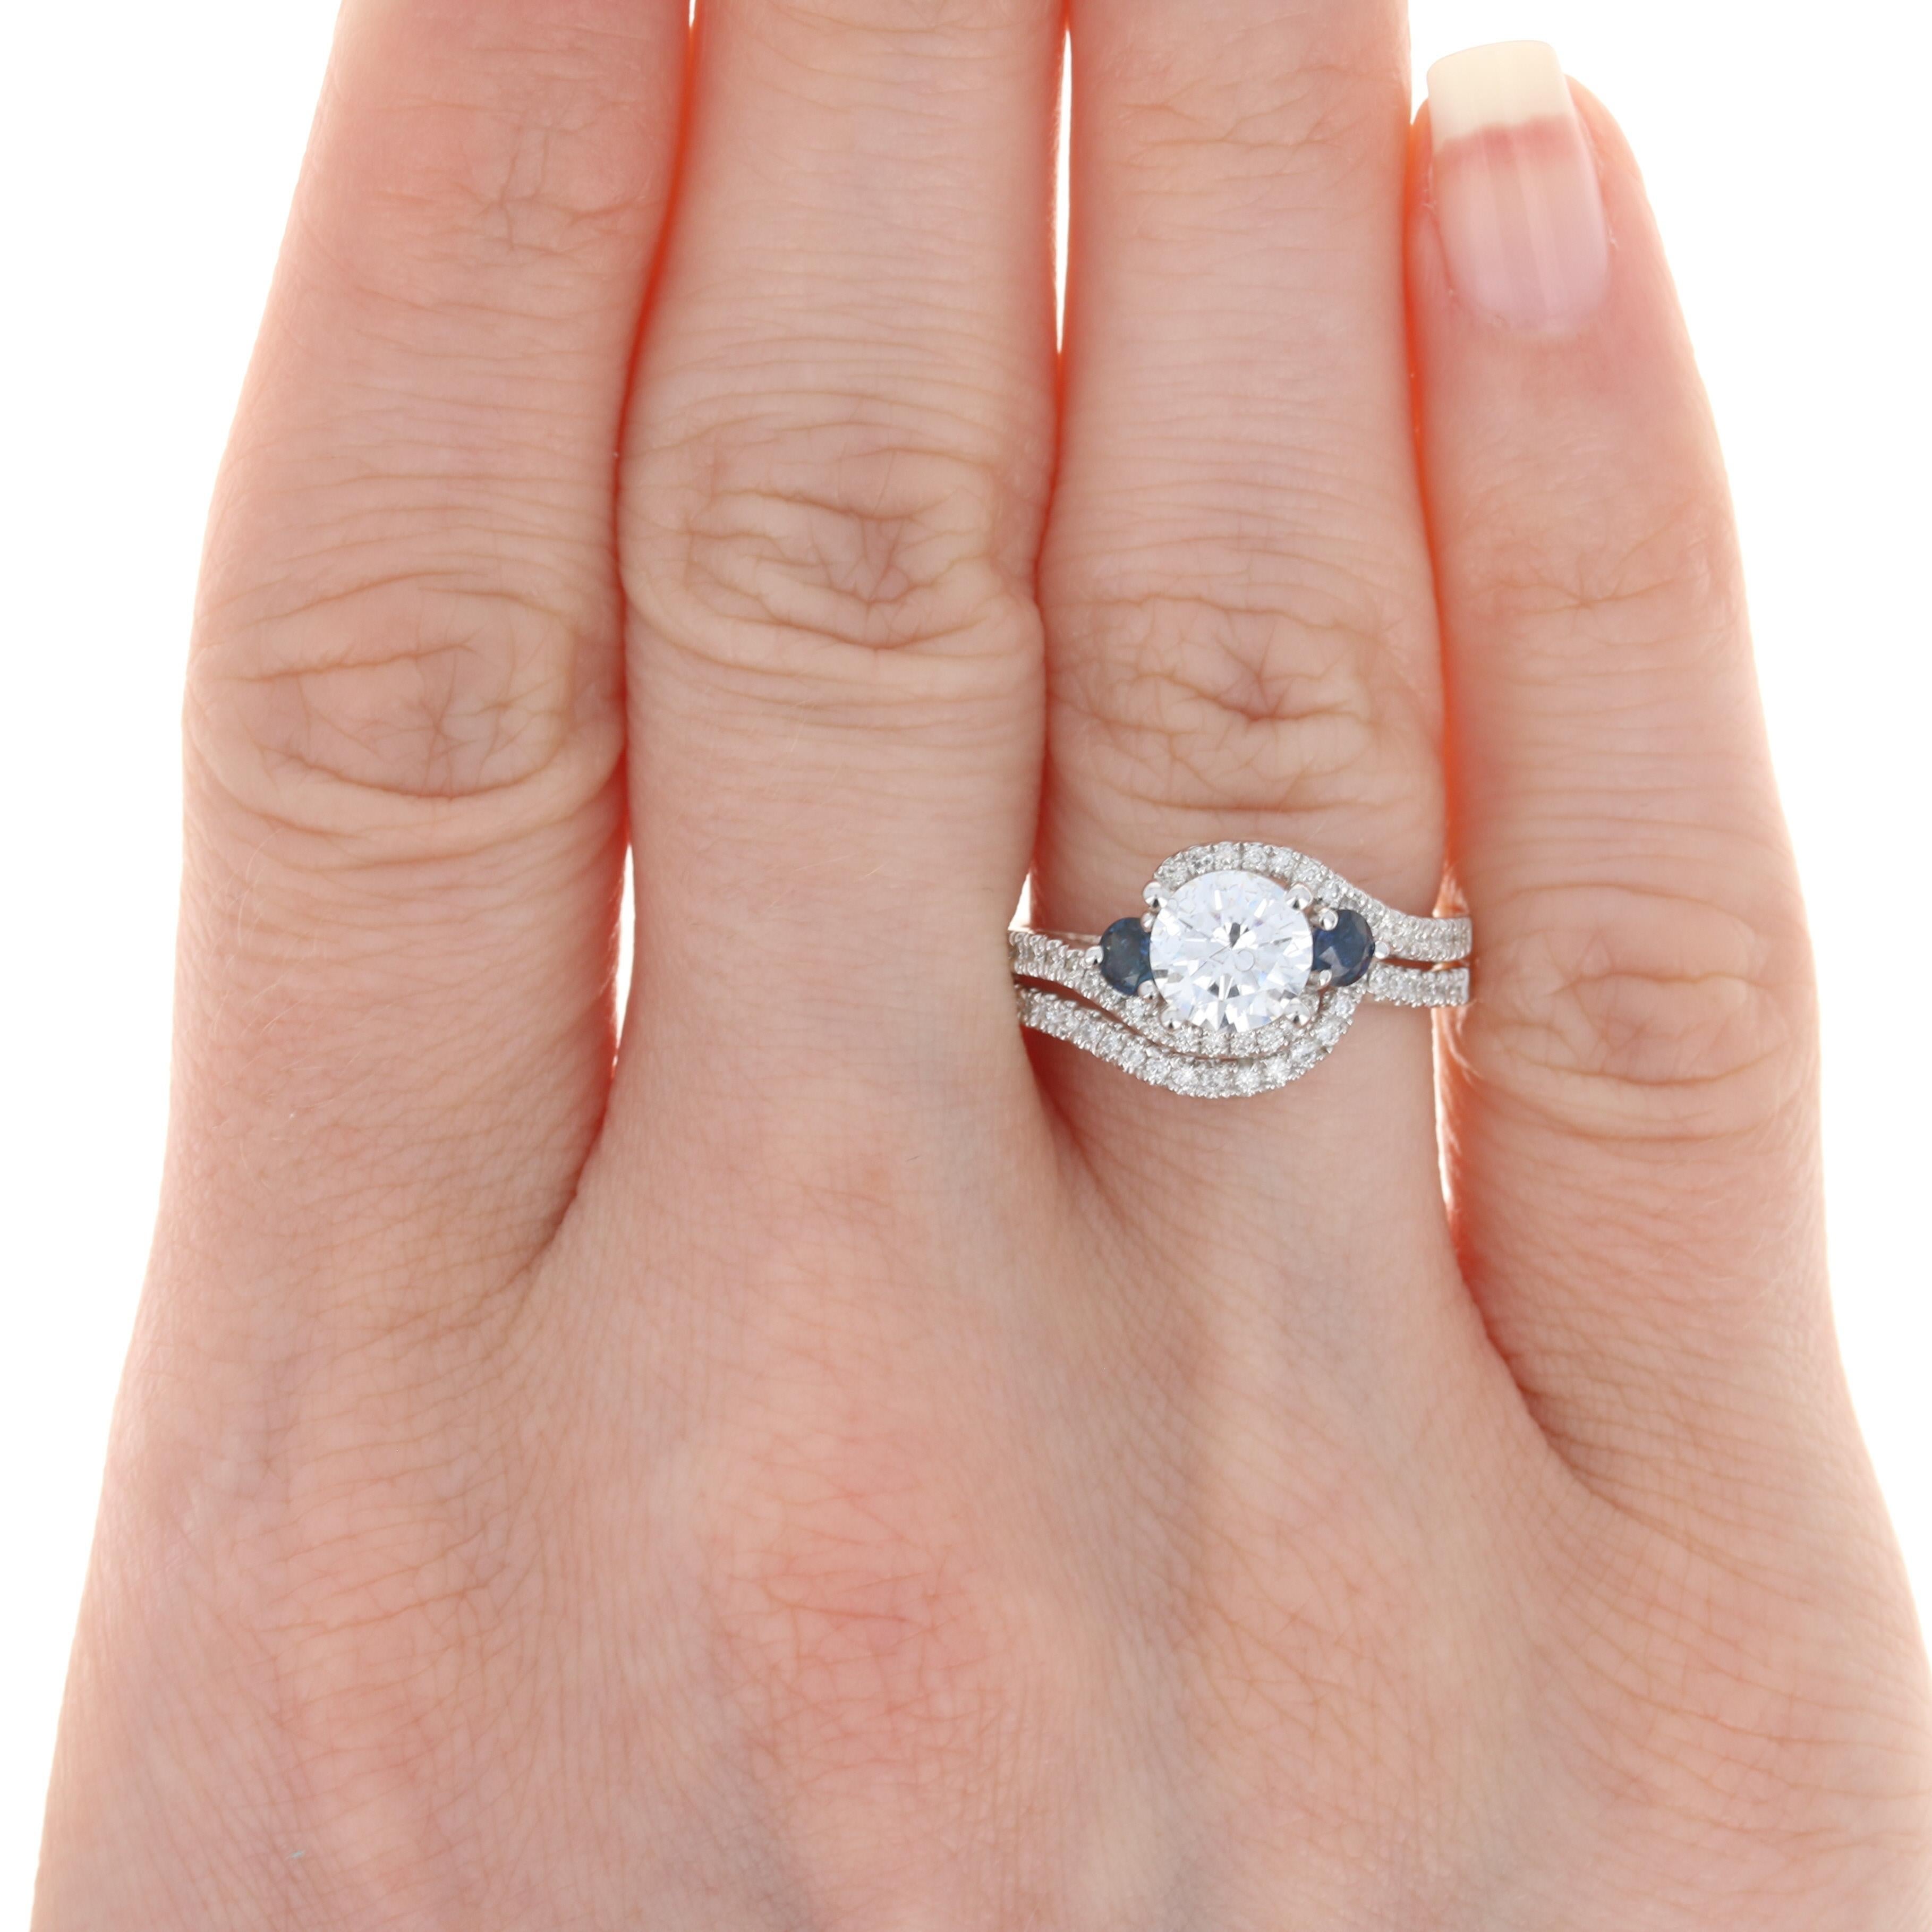 diamond solitaire with sapphire side stones